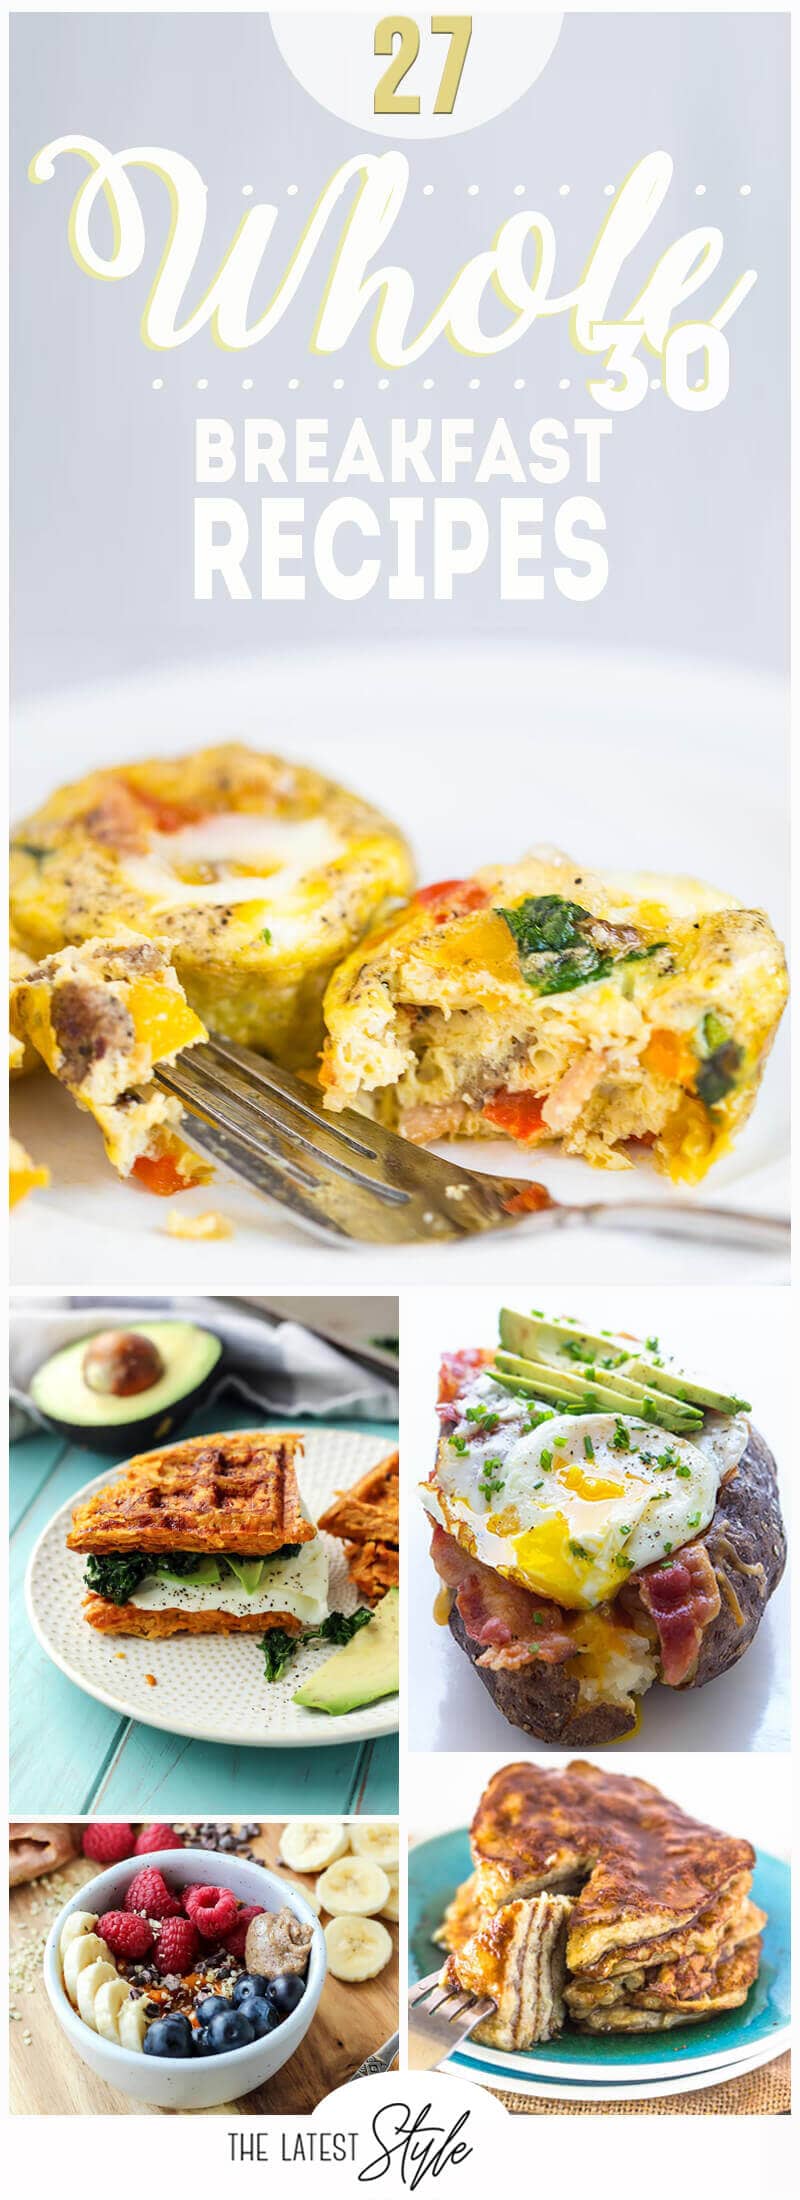 27 Awesome Whole 30 Breakfast Recipes for a Healthy Morning